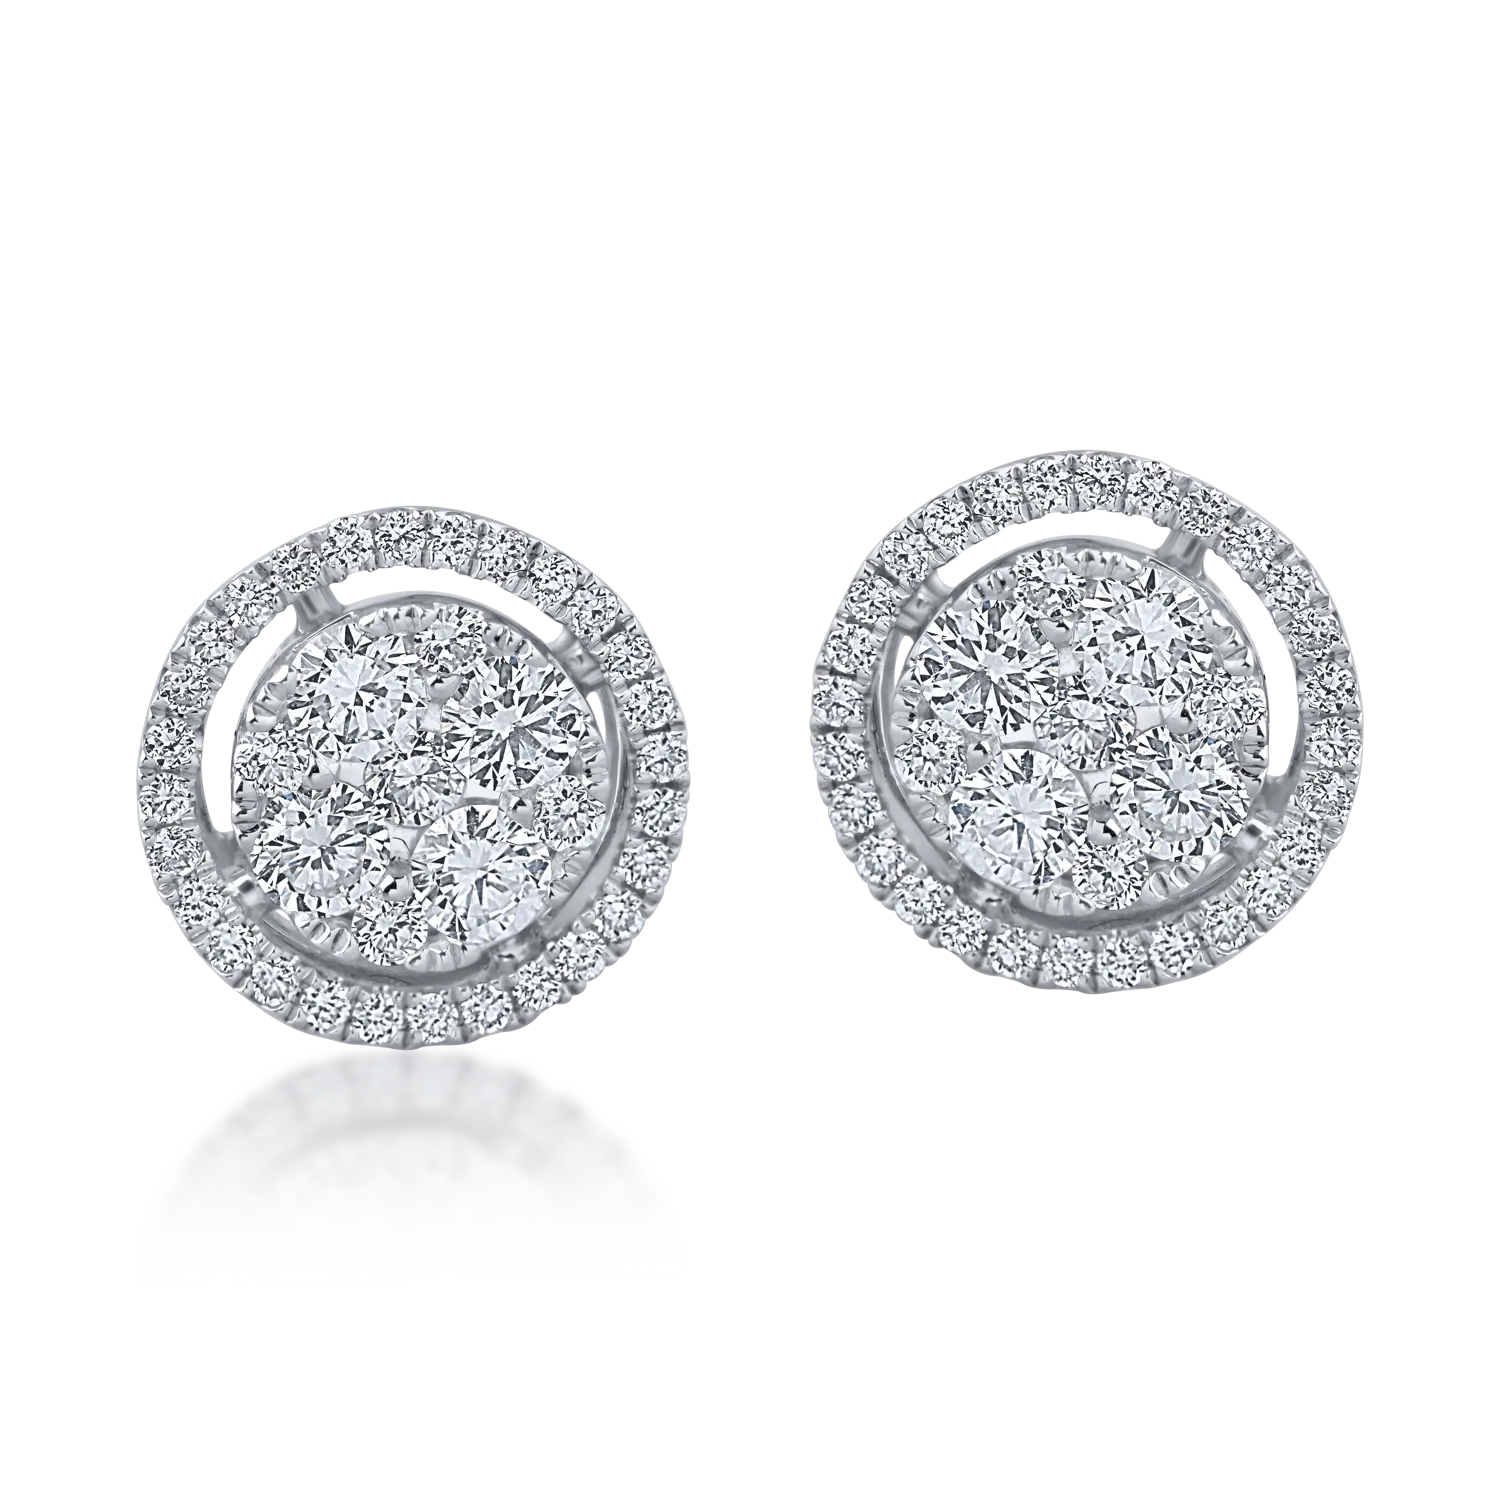 White gold earrings with 0.65ct diamonds